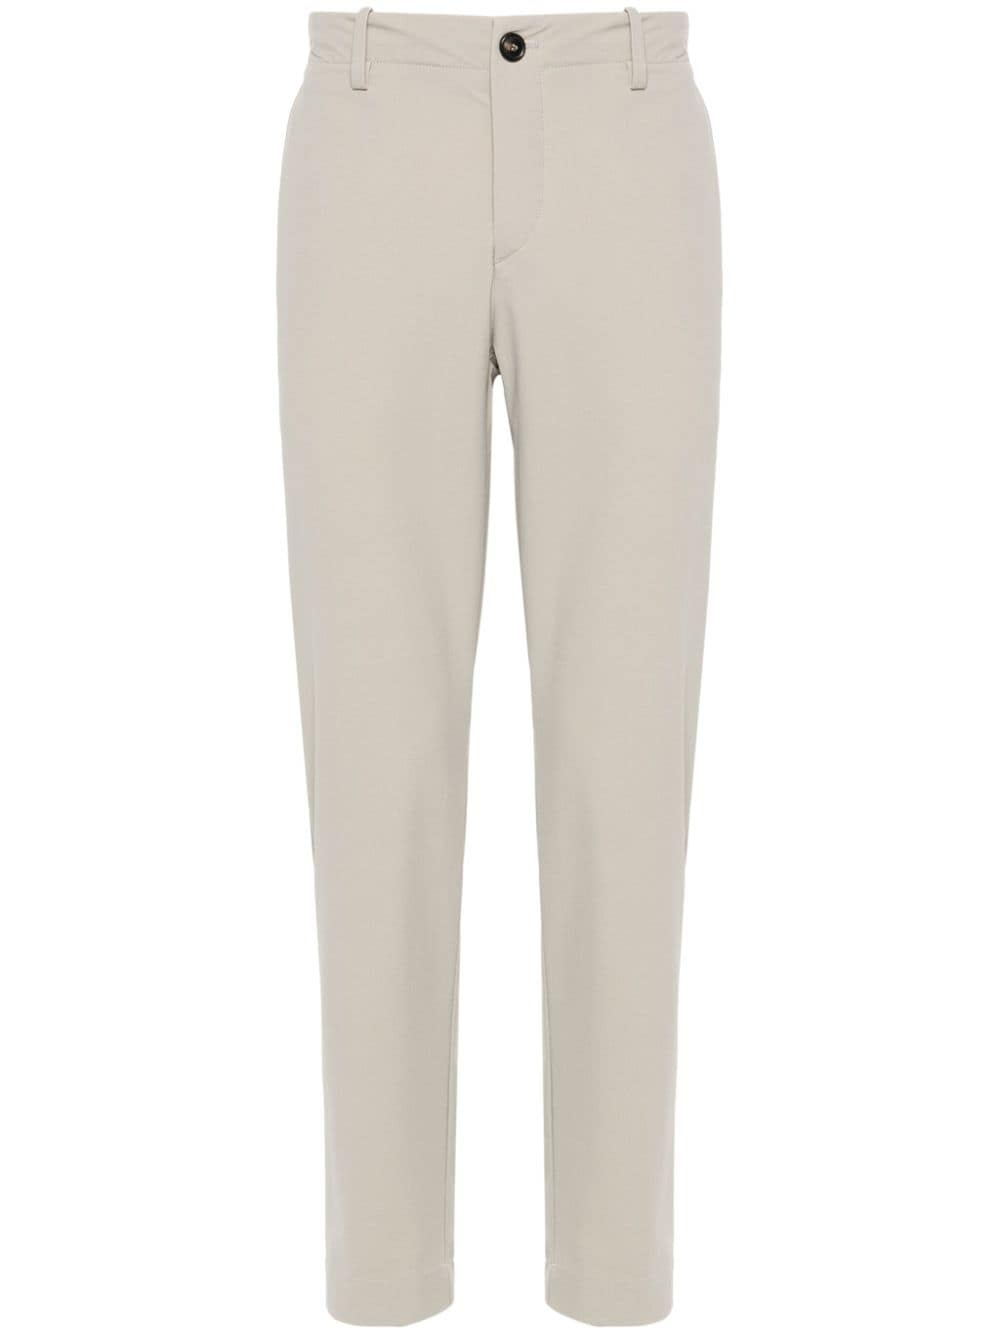 RRD striped straight trousers - Nude